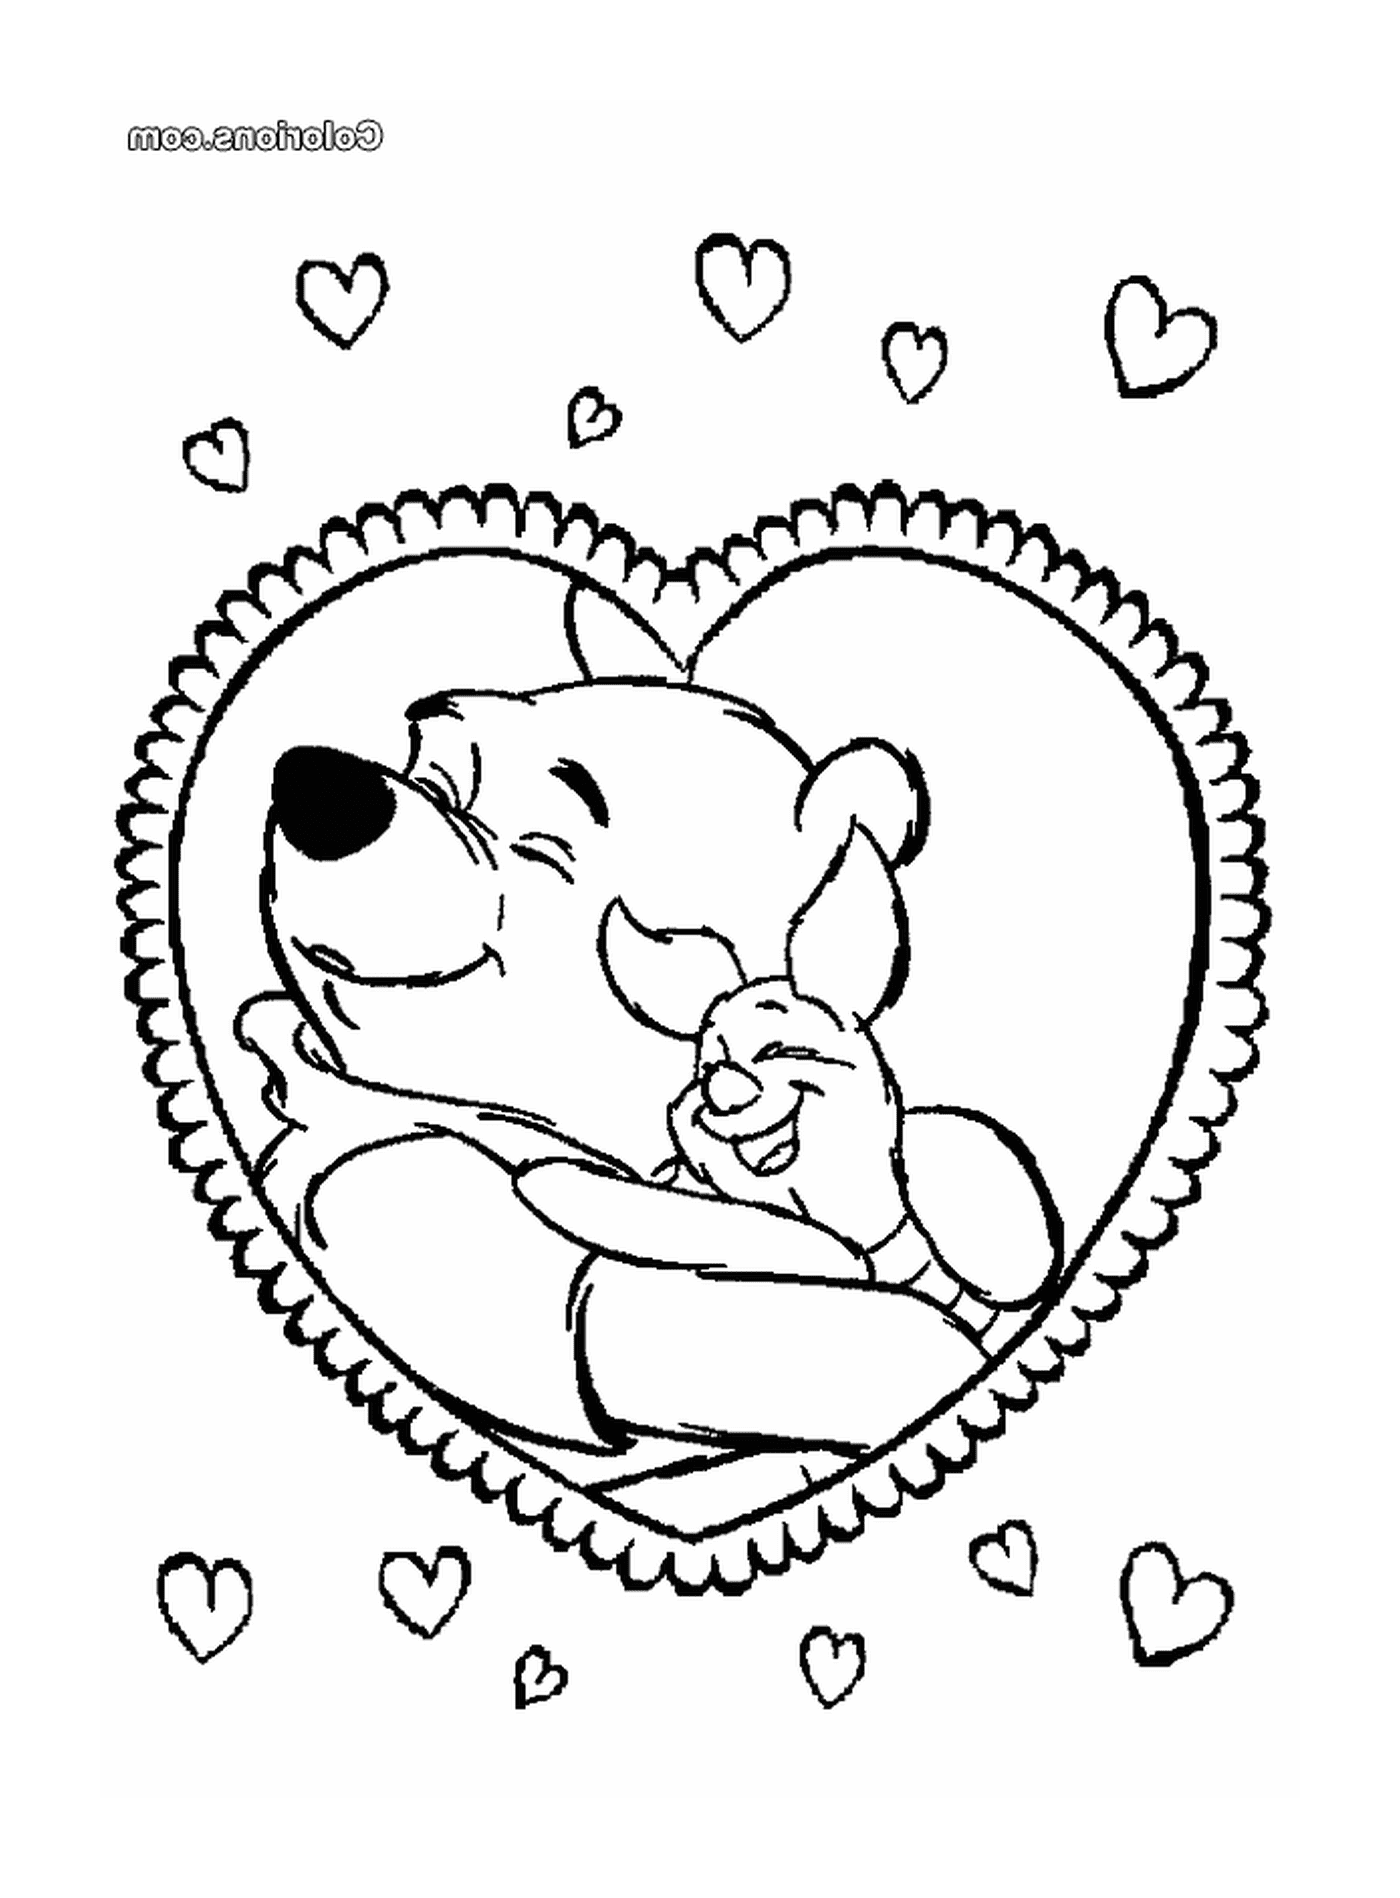  Valentine's Day, bear in a heart 